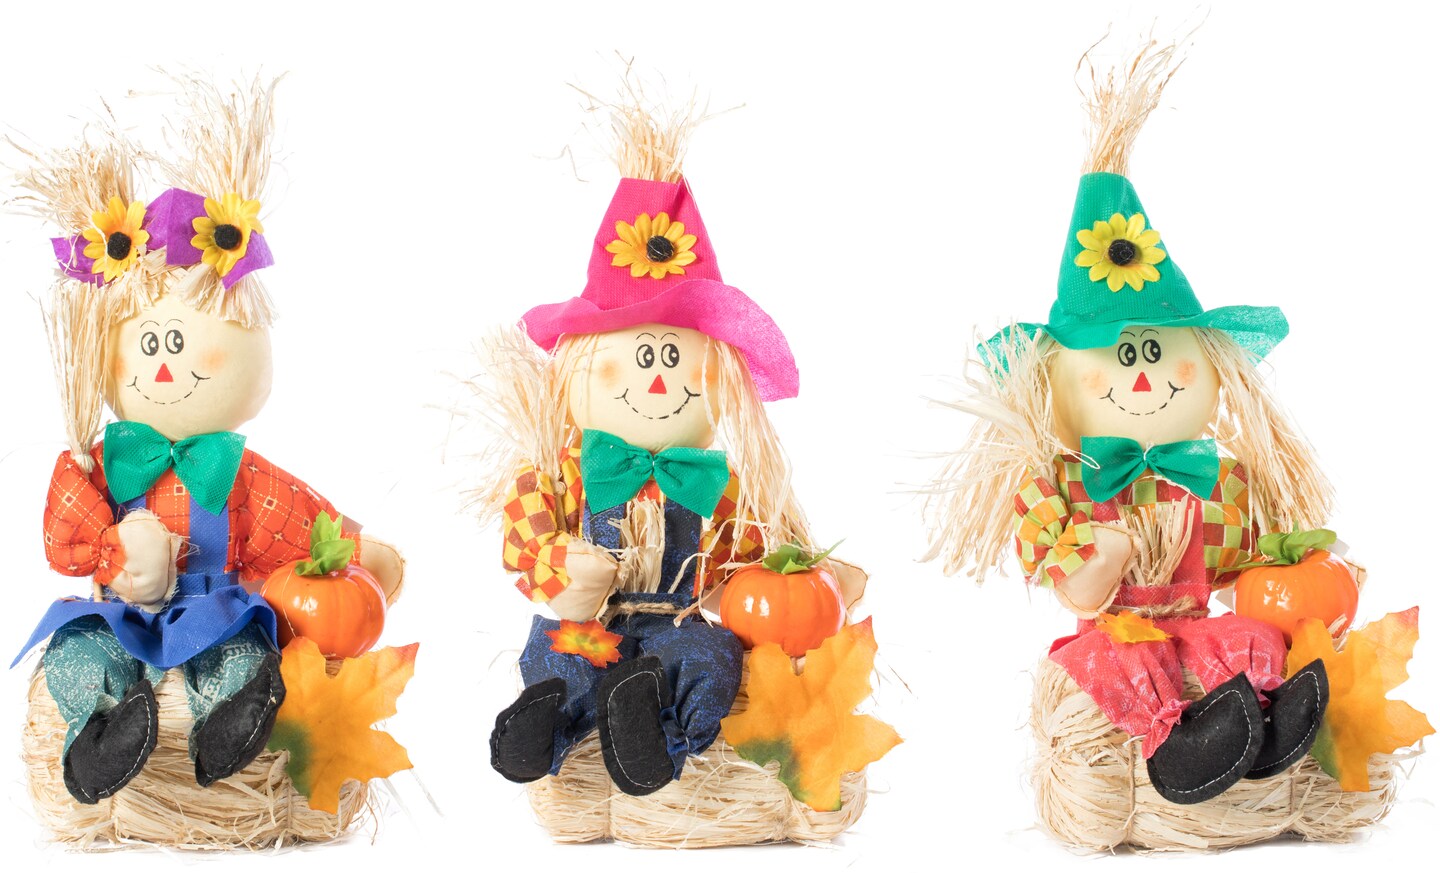 Gardenised 13 Inch Adorable Trio Yard Decor Featuring Outdoor Garden Scarecrows Relaxing Gracefully on Rustic Hay Bales. Perfect for Adding a Touch of Countryside Charm to your Outdoor Space